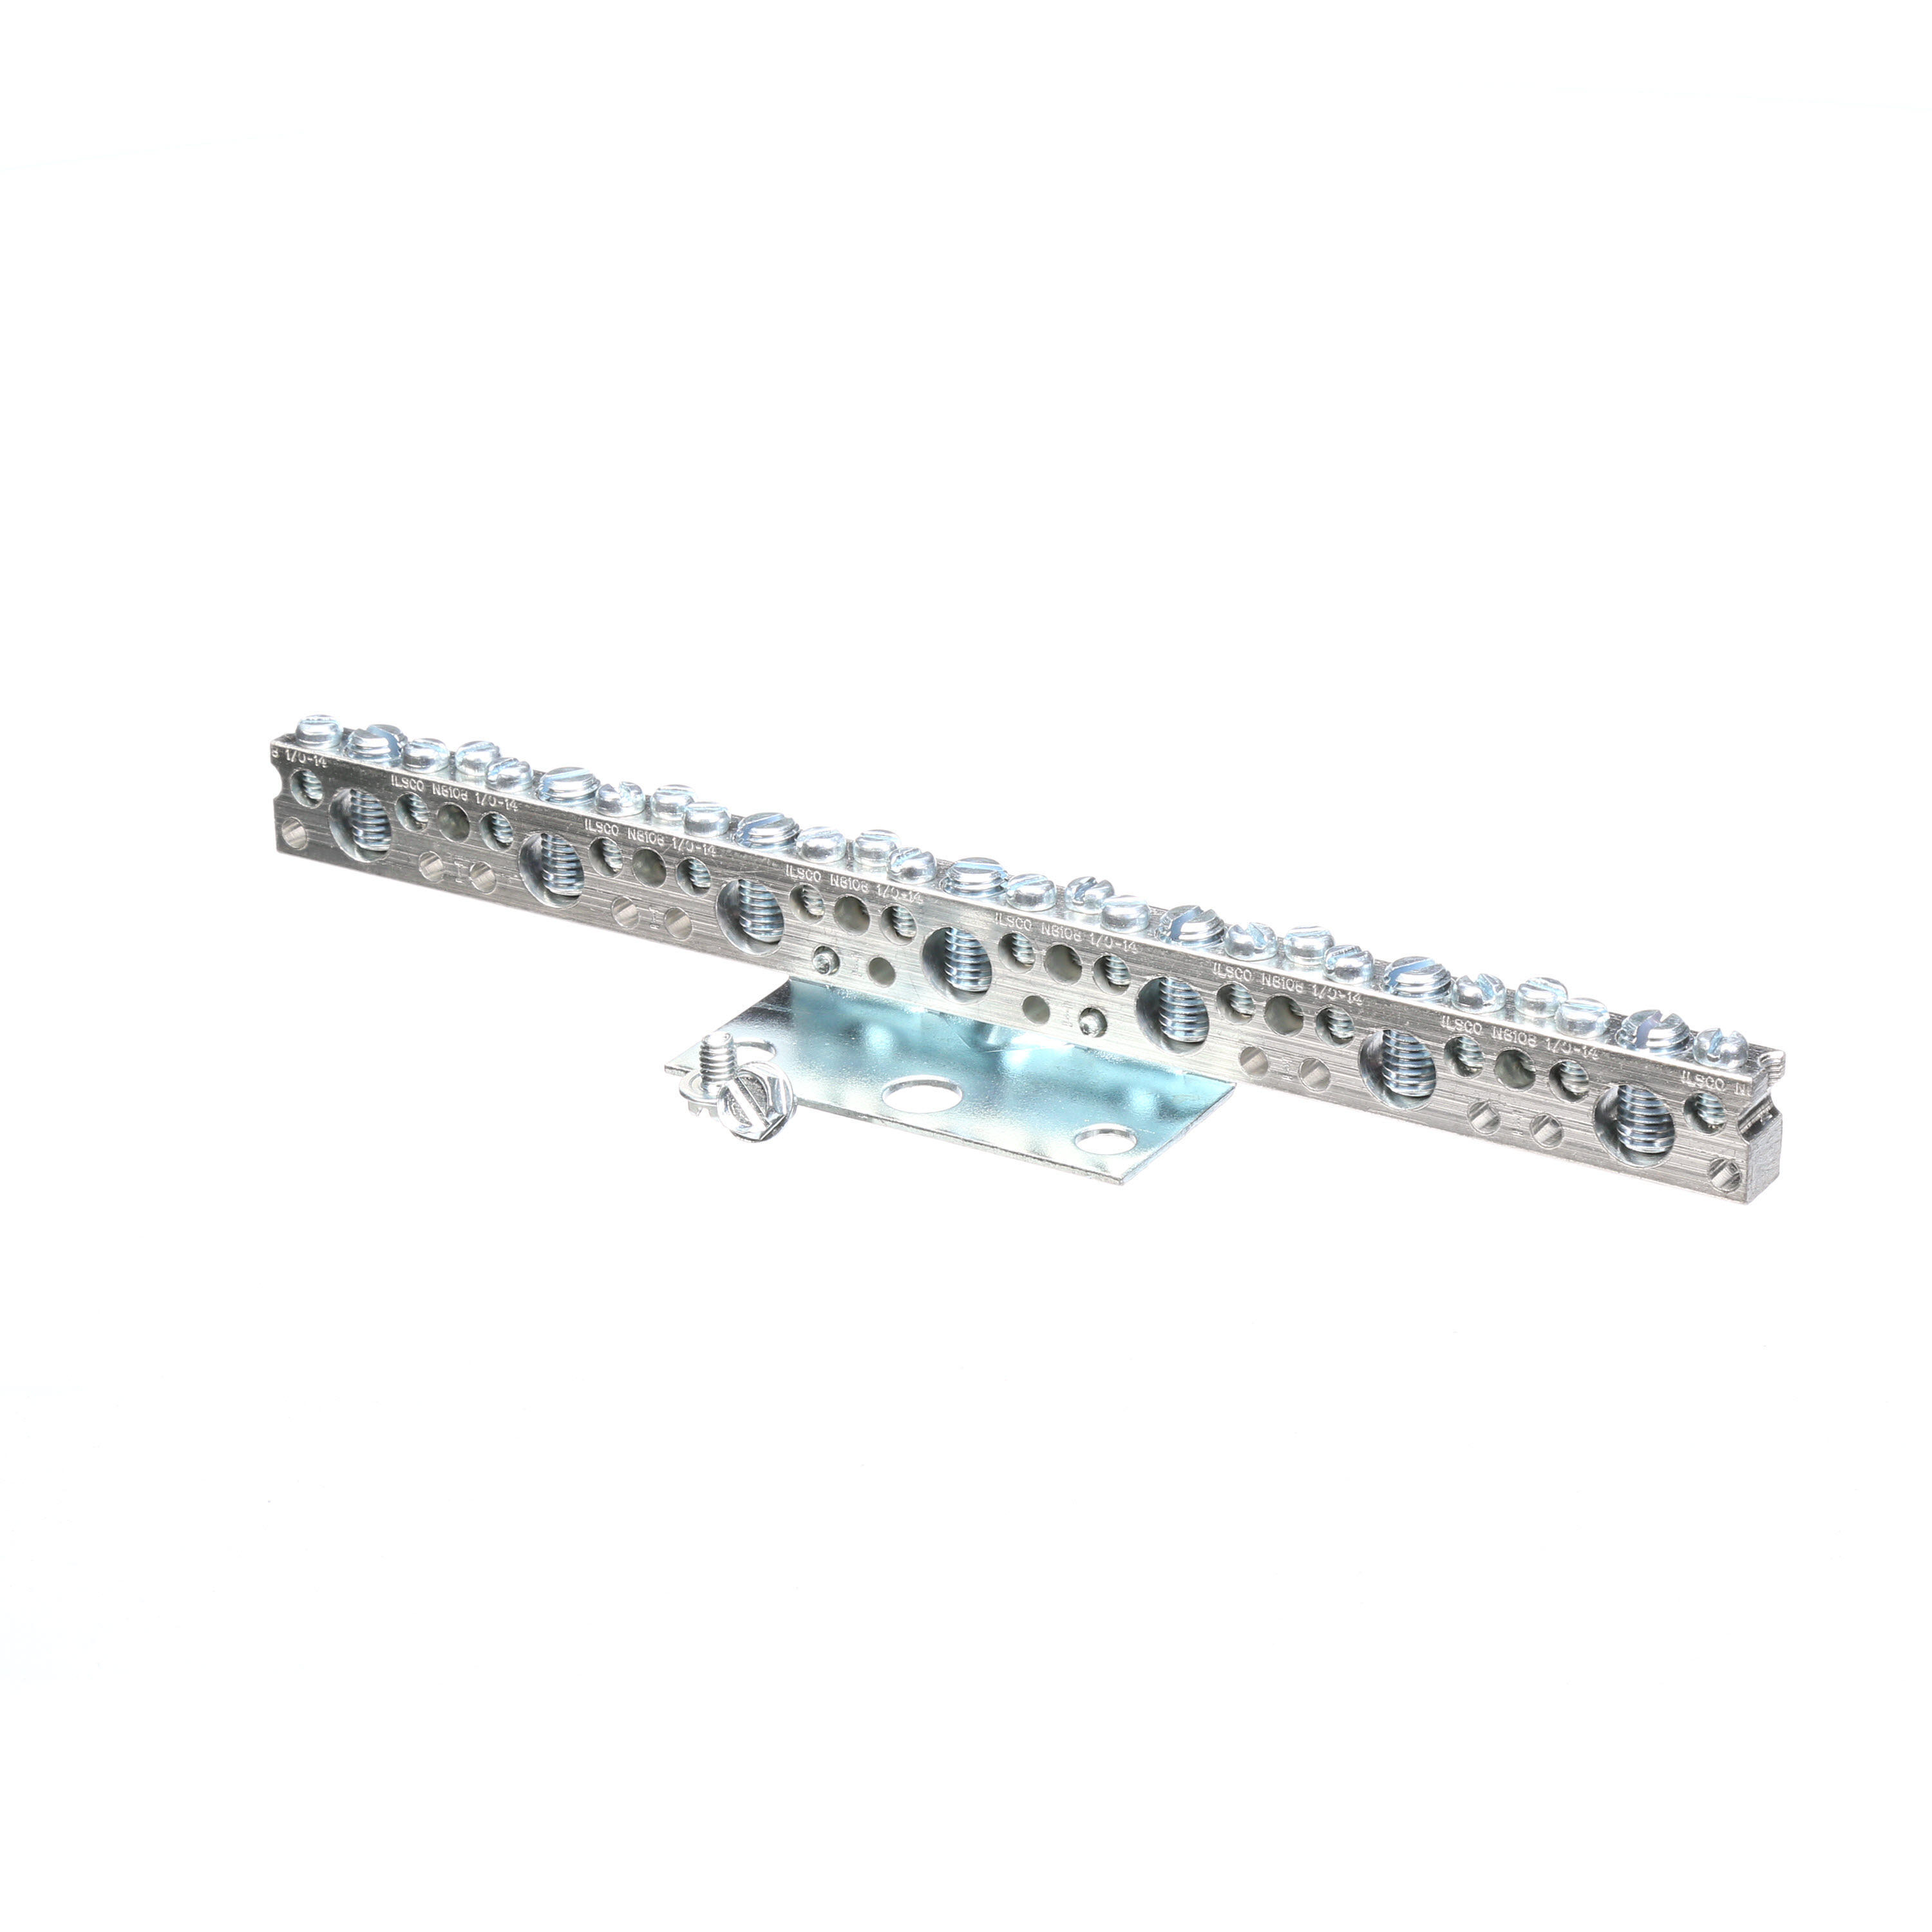 Siemens Low Voltage Residential Specialty Load Centers Miscellaneous Grounding bars (Al/Cu). Large connectors rated for (one 14-1/0, or 2-3 14-10), small connectors rated for (one 14-6 or two #14-12) length 8-1/8 IN. Connectors 20 small and 7 large.